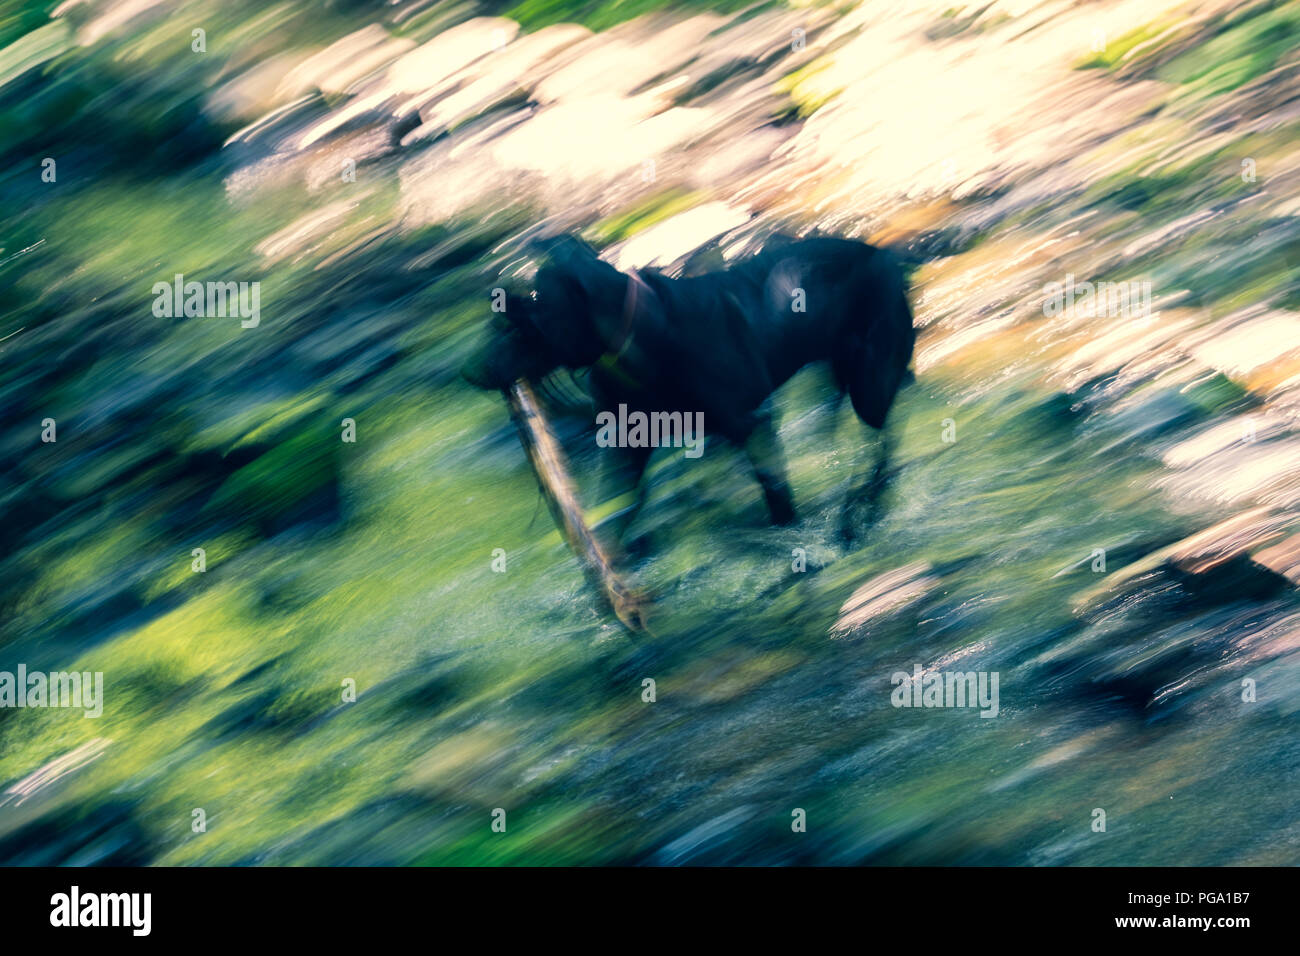 Blurring the image of a surface of the water of the stream illuminated by sunshine in which the dog runs is photographed on long endurance. Stock Photo